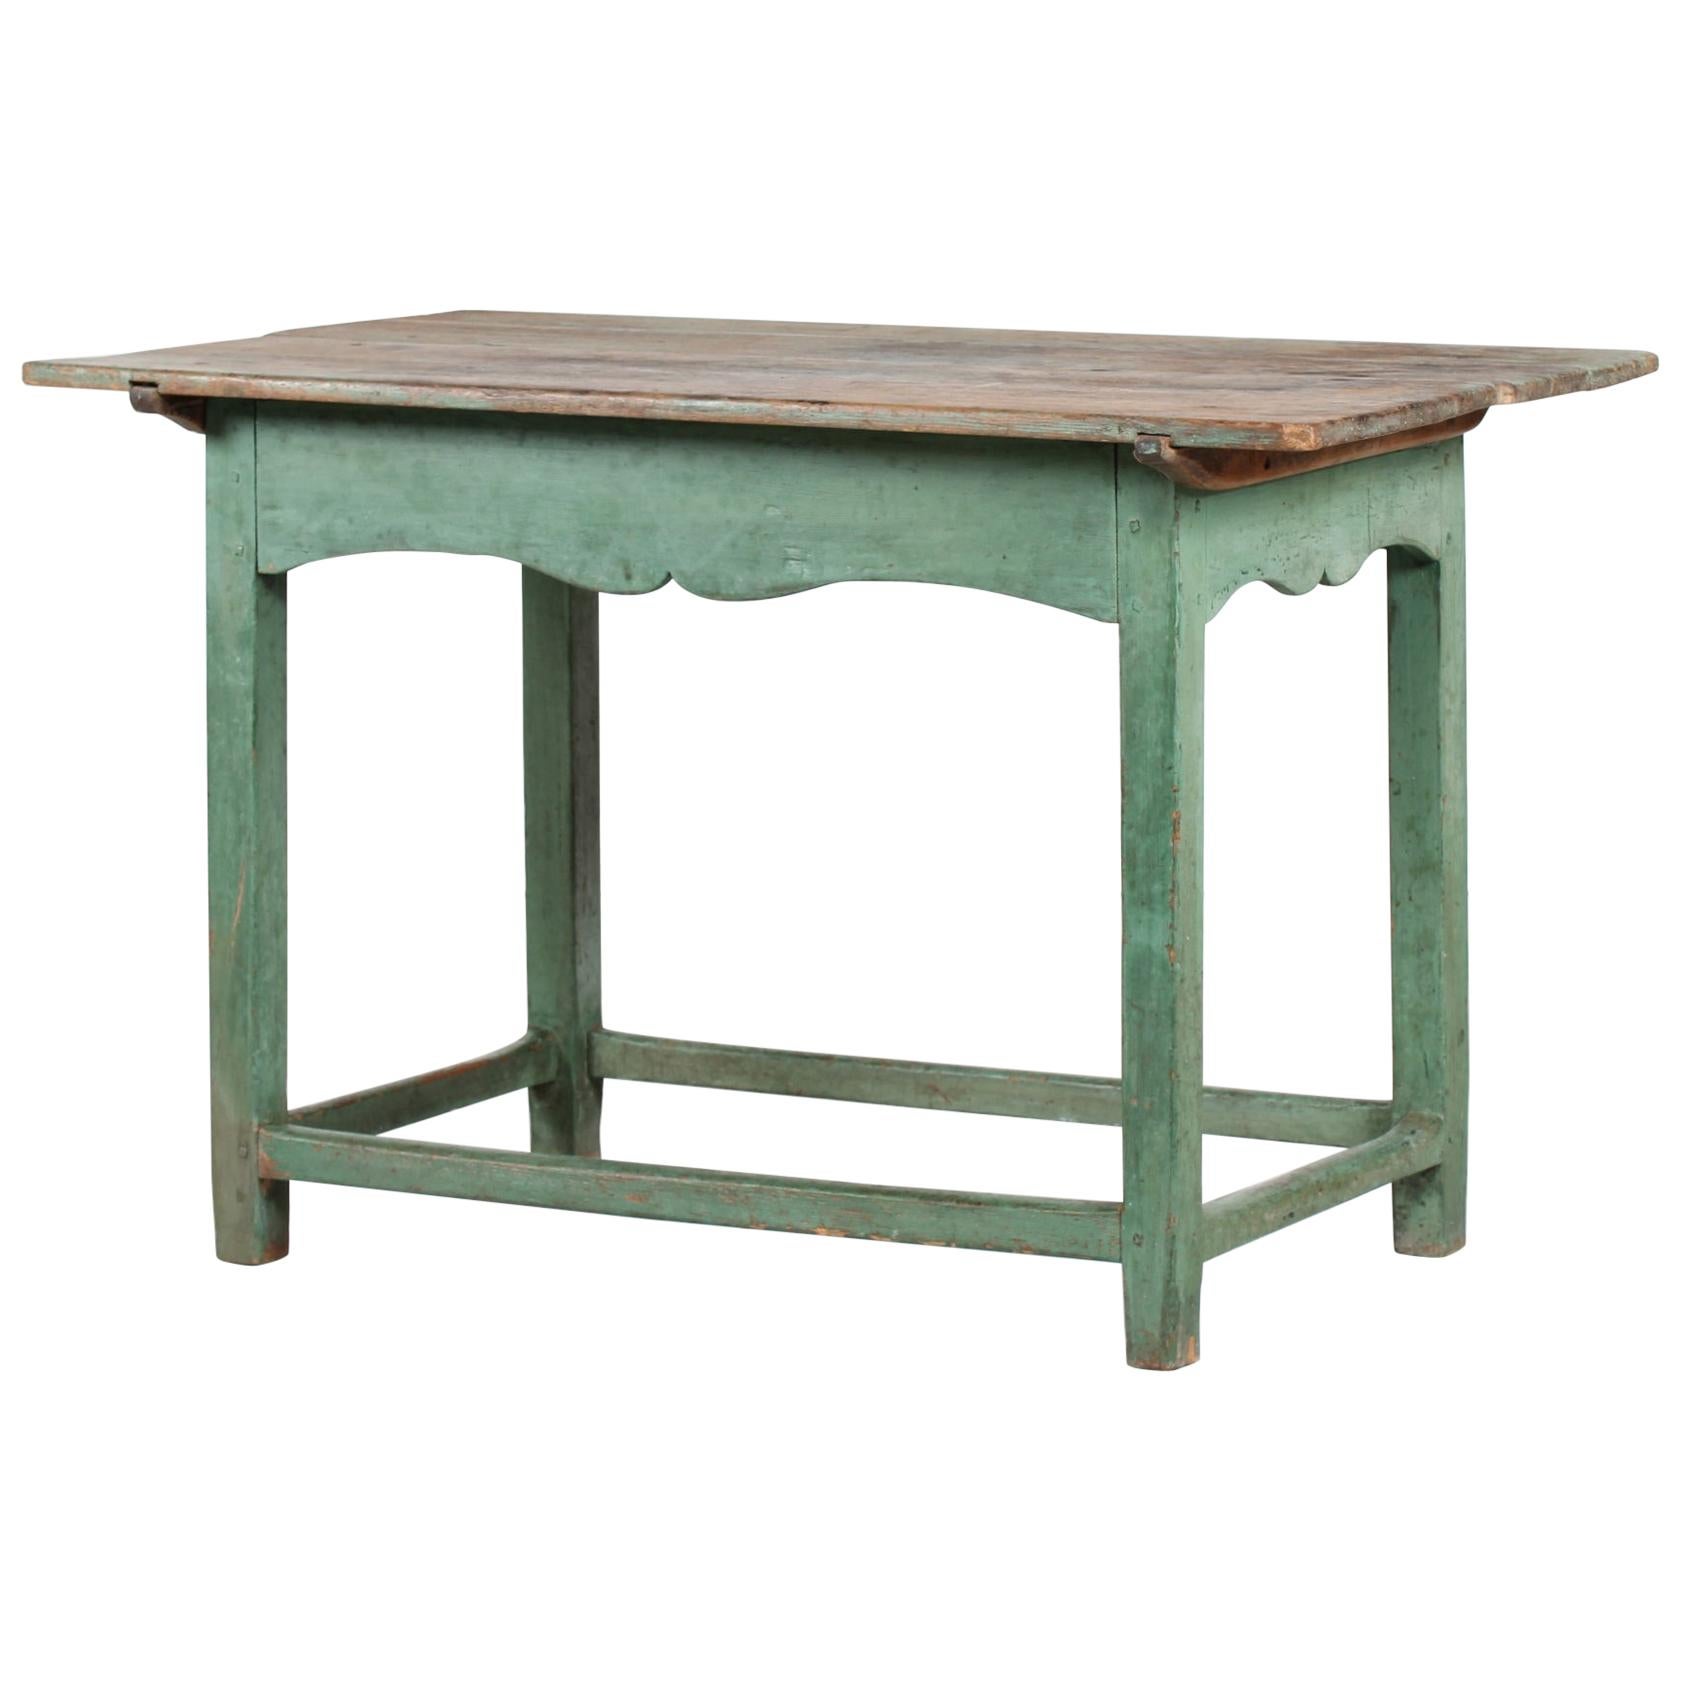 Scandinavian Antique Table of Pine Wood with Green Patinated Frame, 19th Century